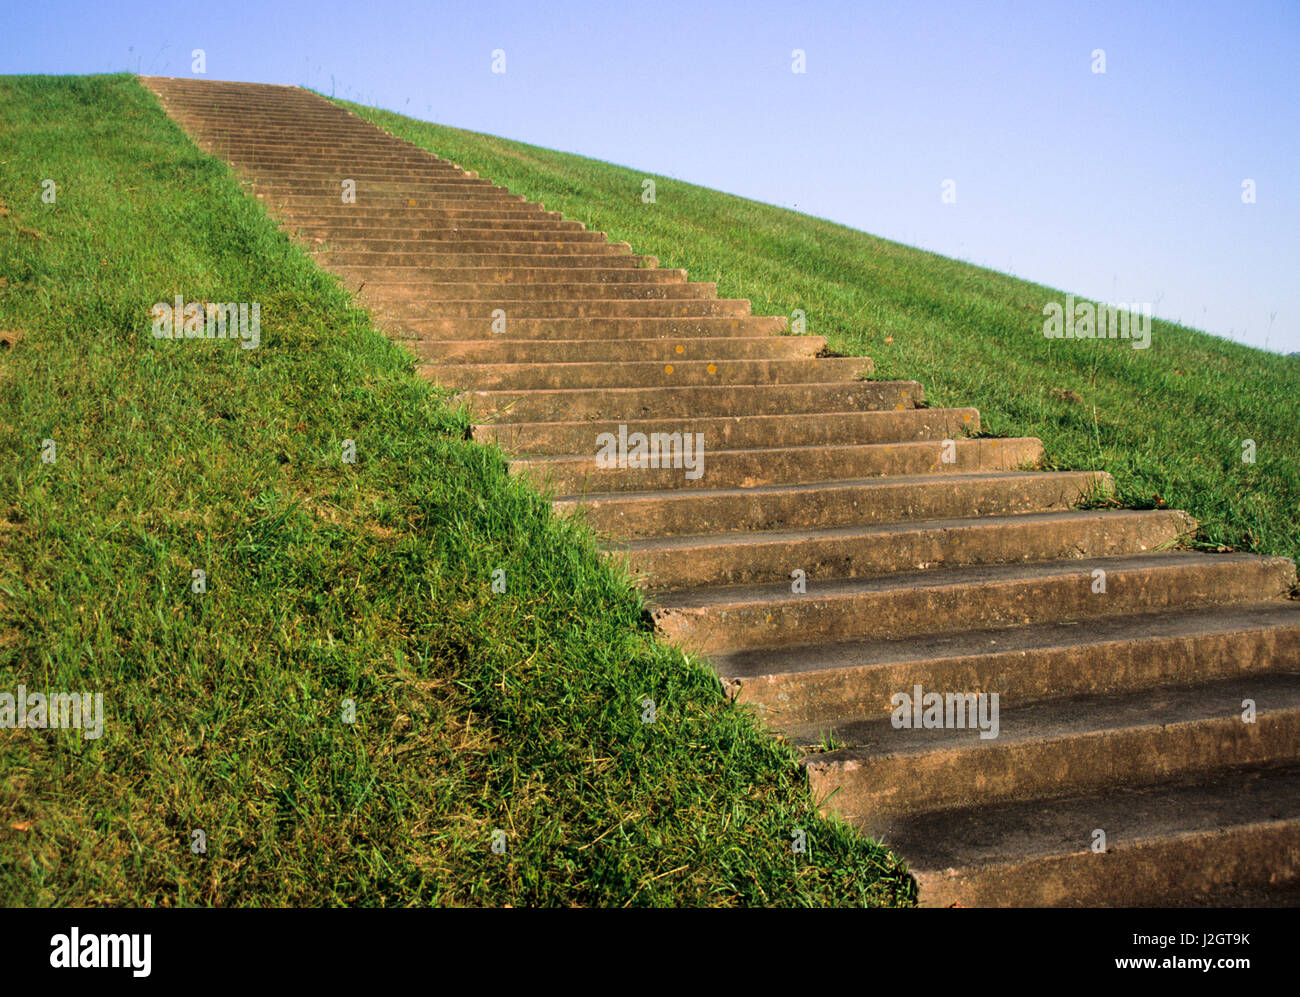 Recreated steps lead to an Aztec style earth mound. Stock Photo